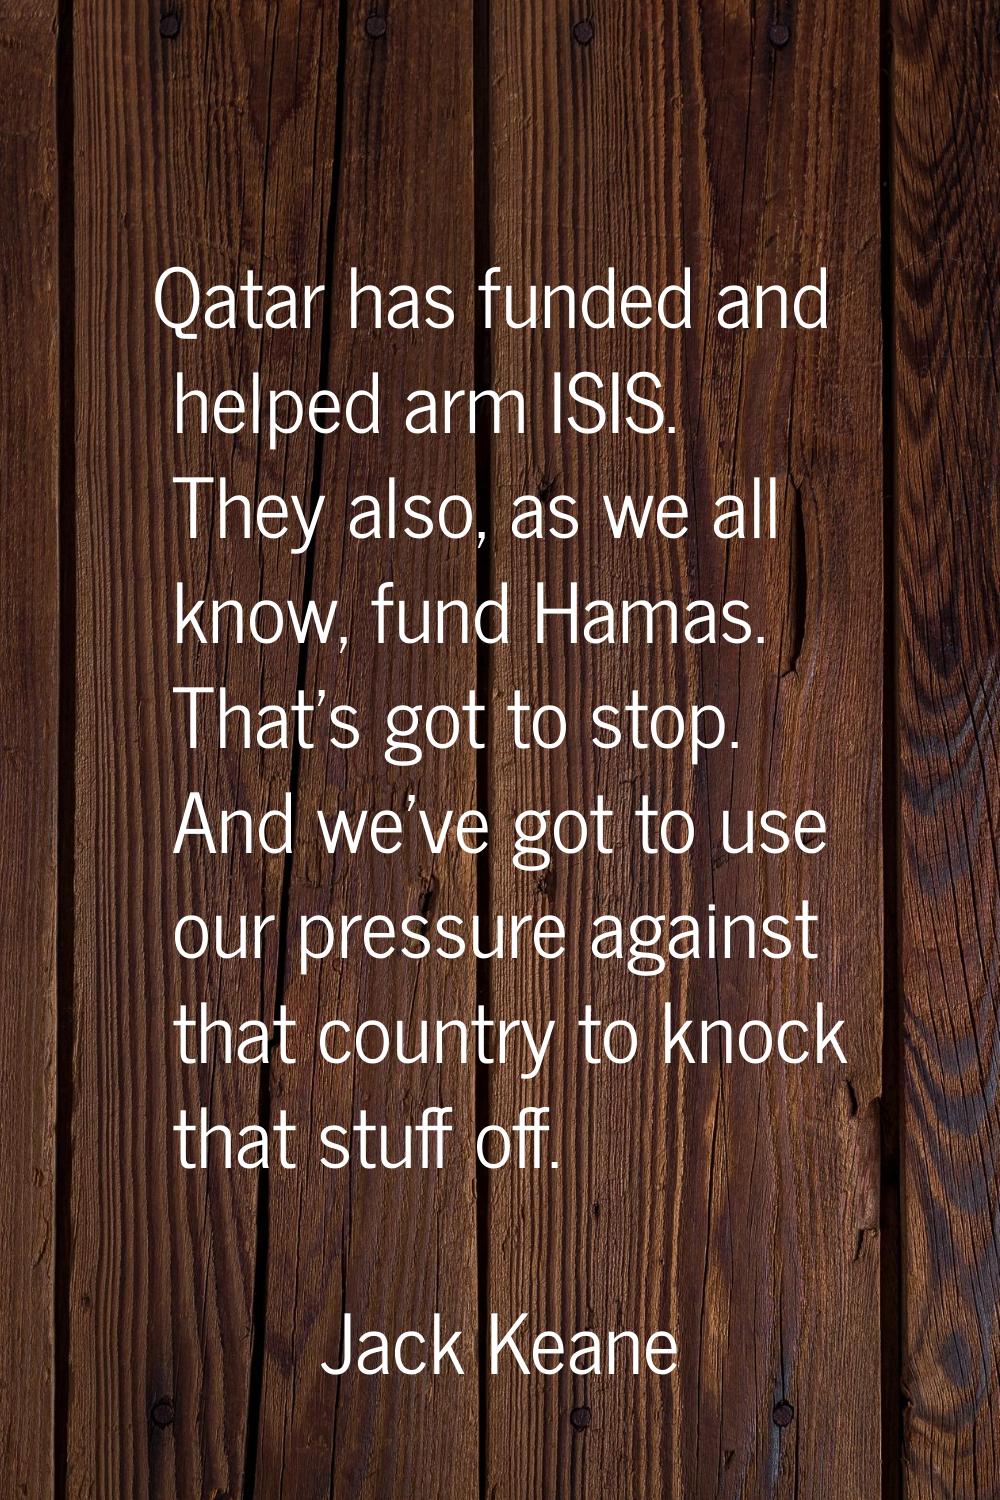 Qatar has funded and helped arm ISIS. They also, as we all know, fund Hamas. That's got to stop. An